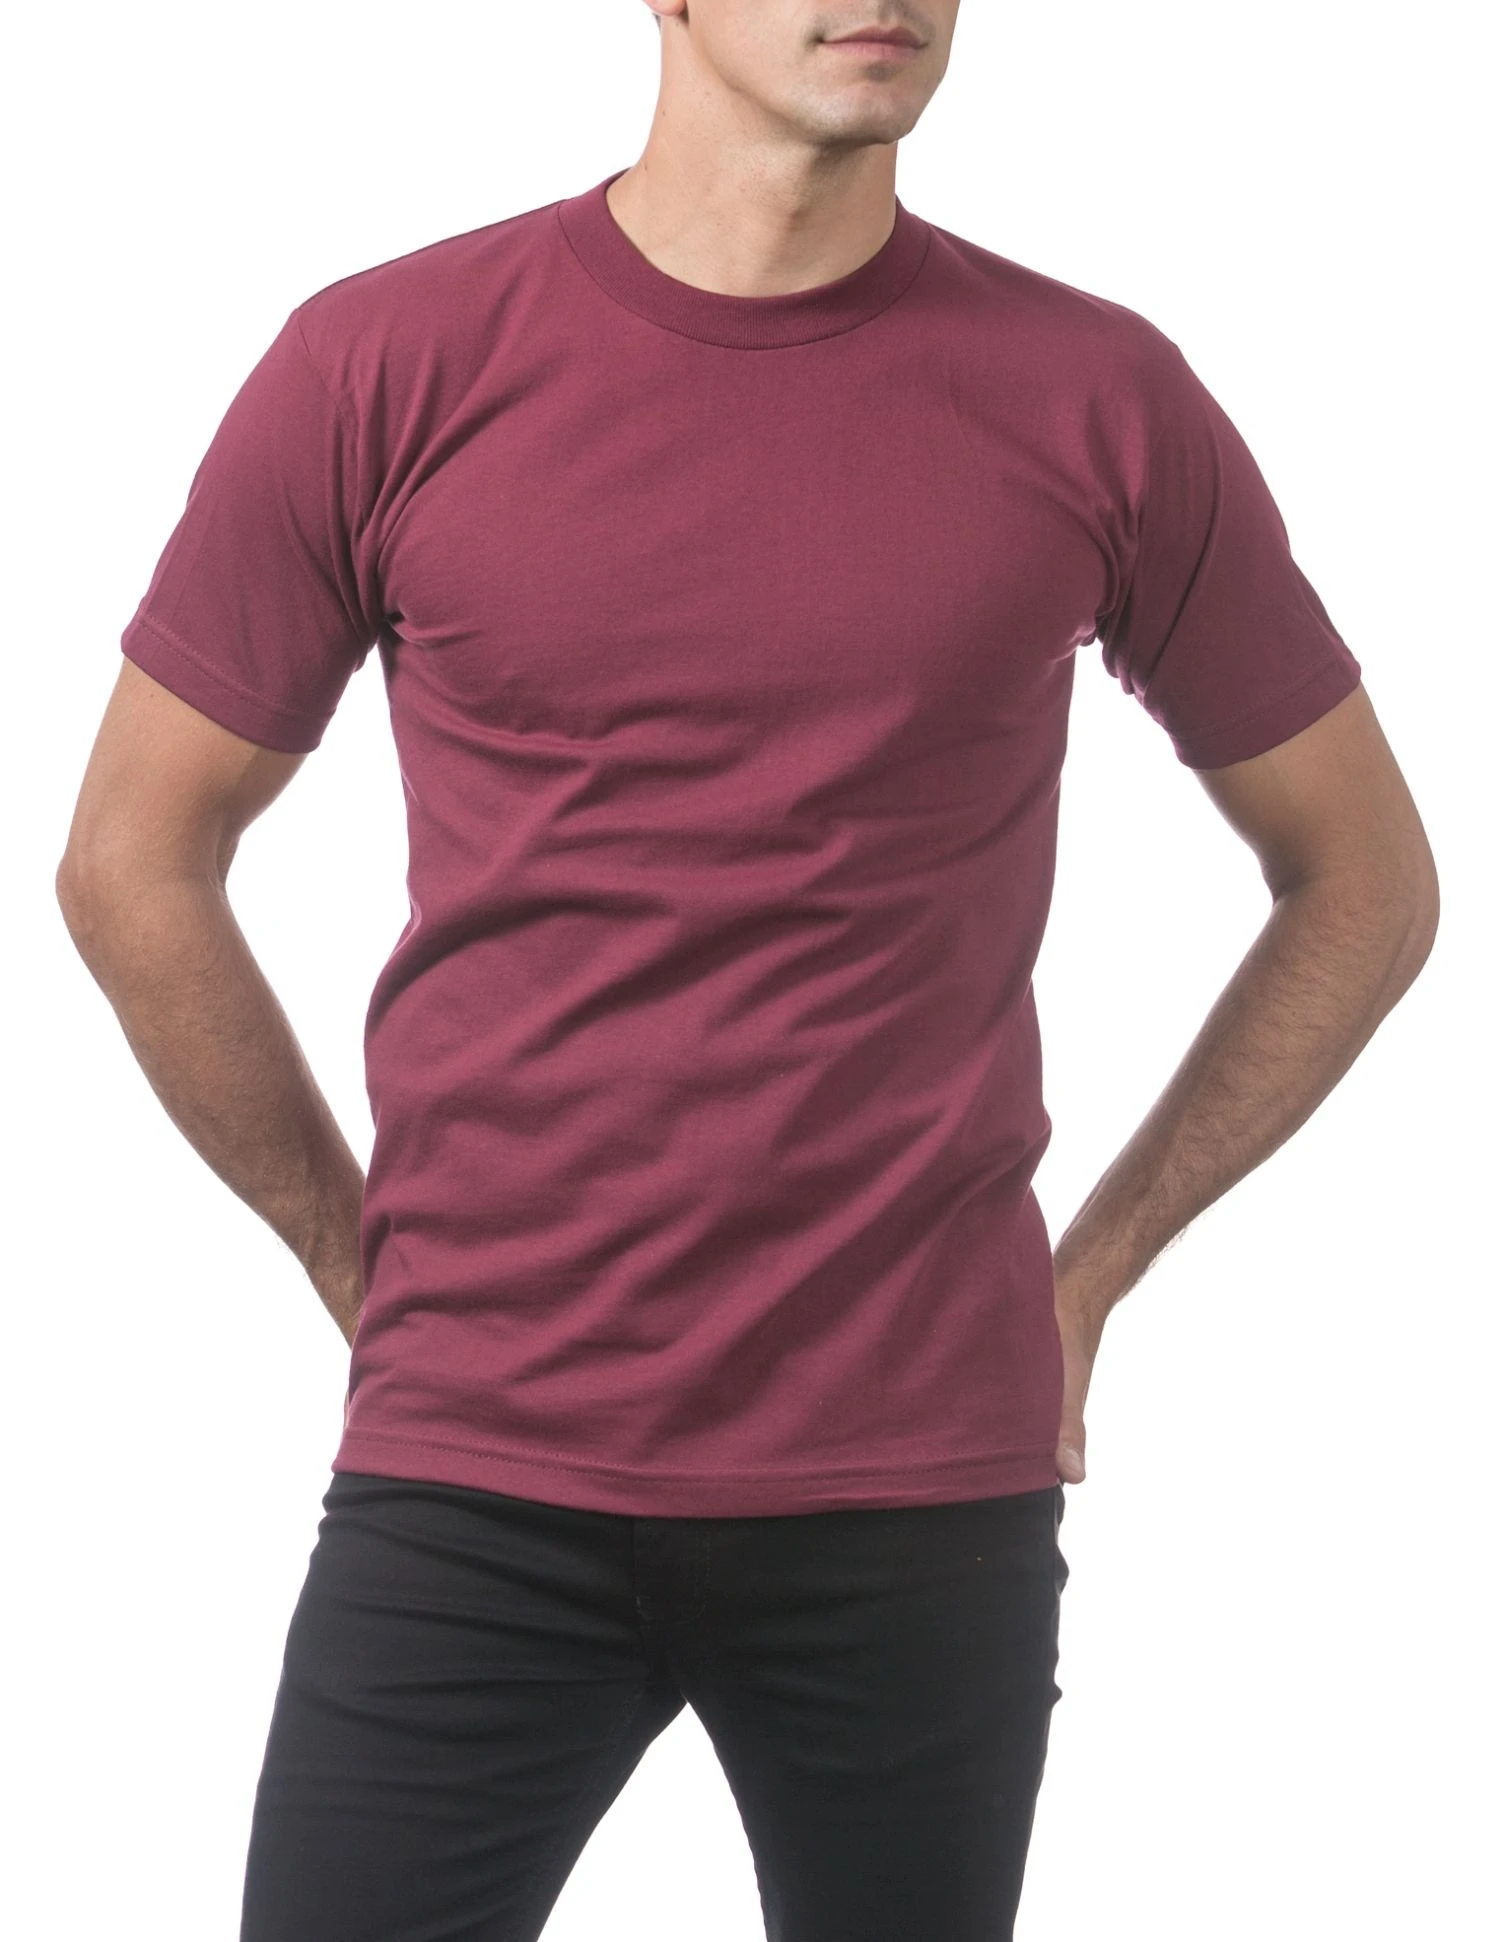 Farbot Men's Tshirts Regular Fit Round Neck Casual T-shirts for